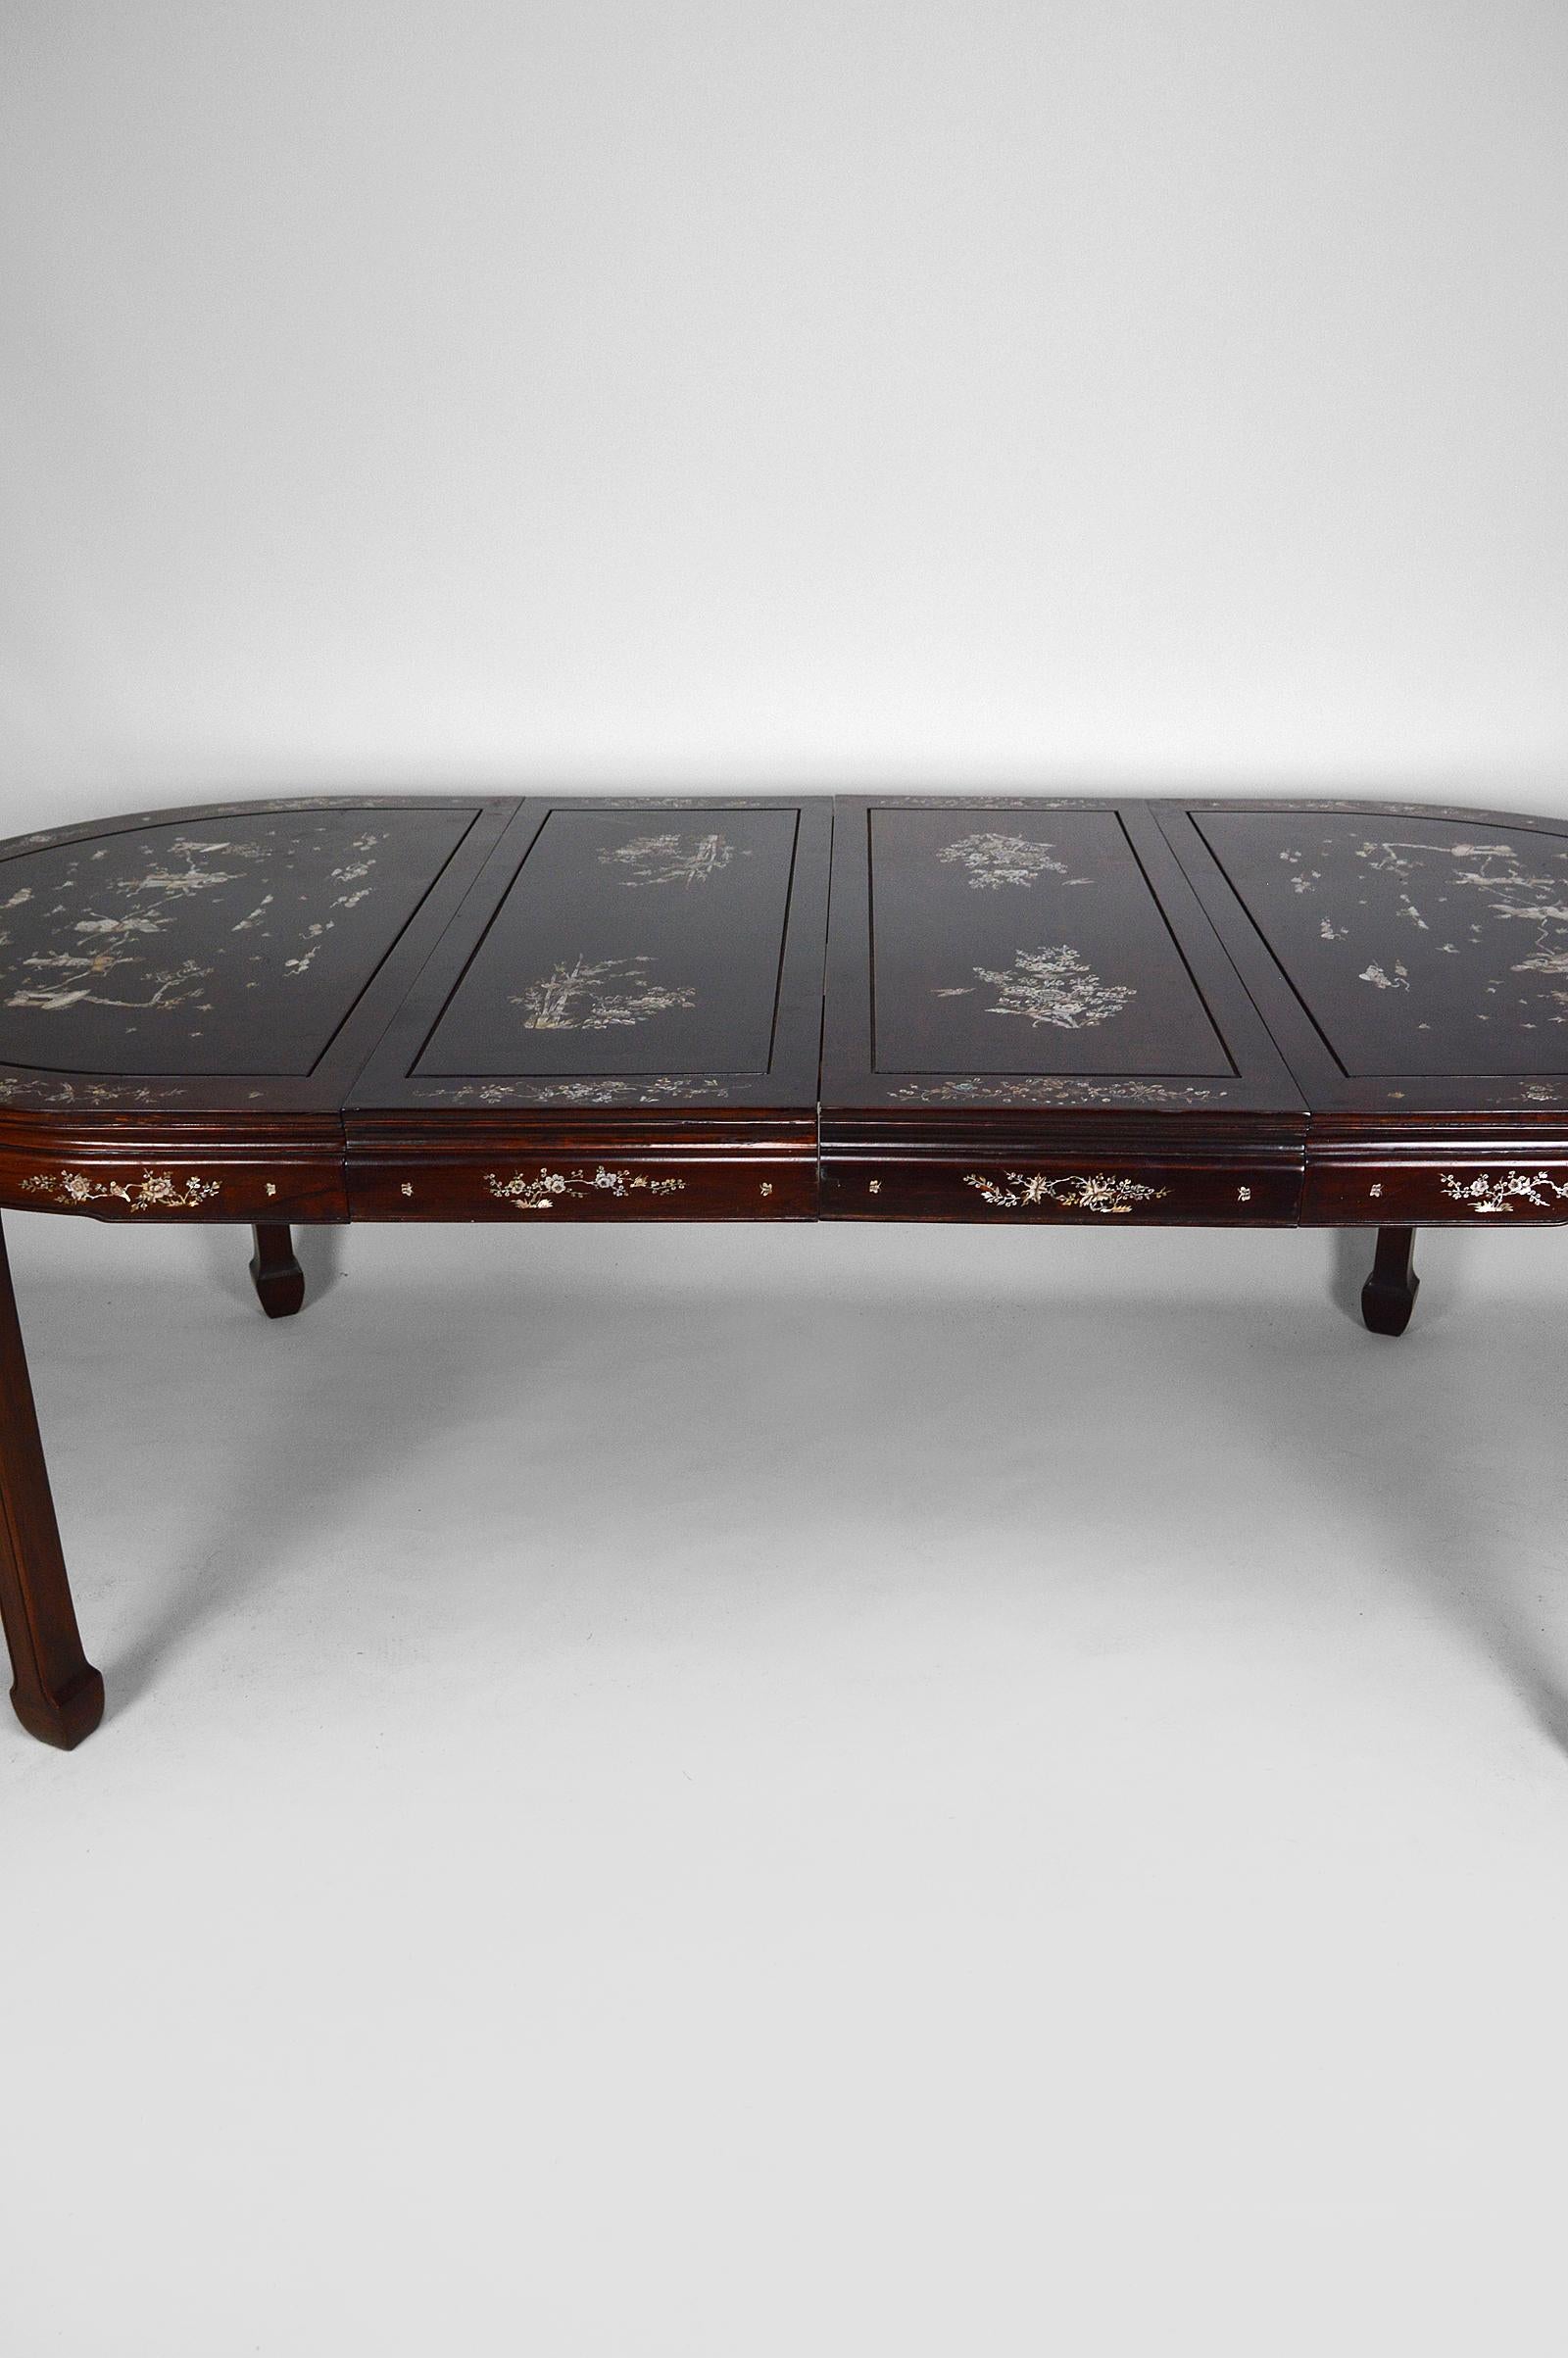 Asian Inlaid Wooden Dining Table with Extensions, Mid-20th Century 12